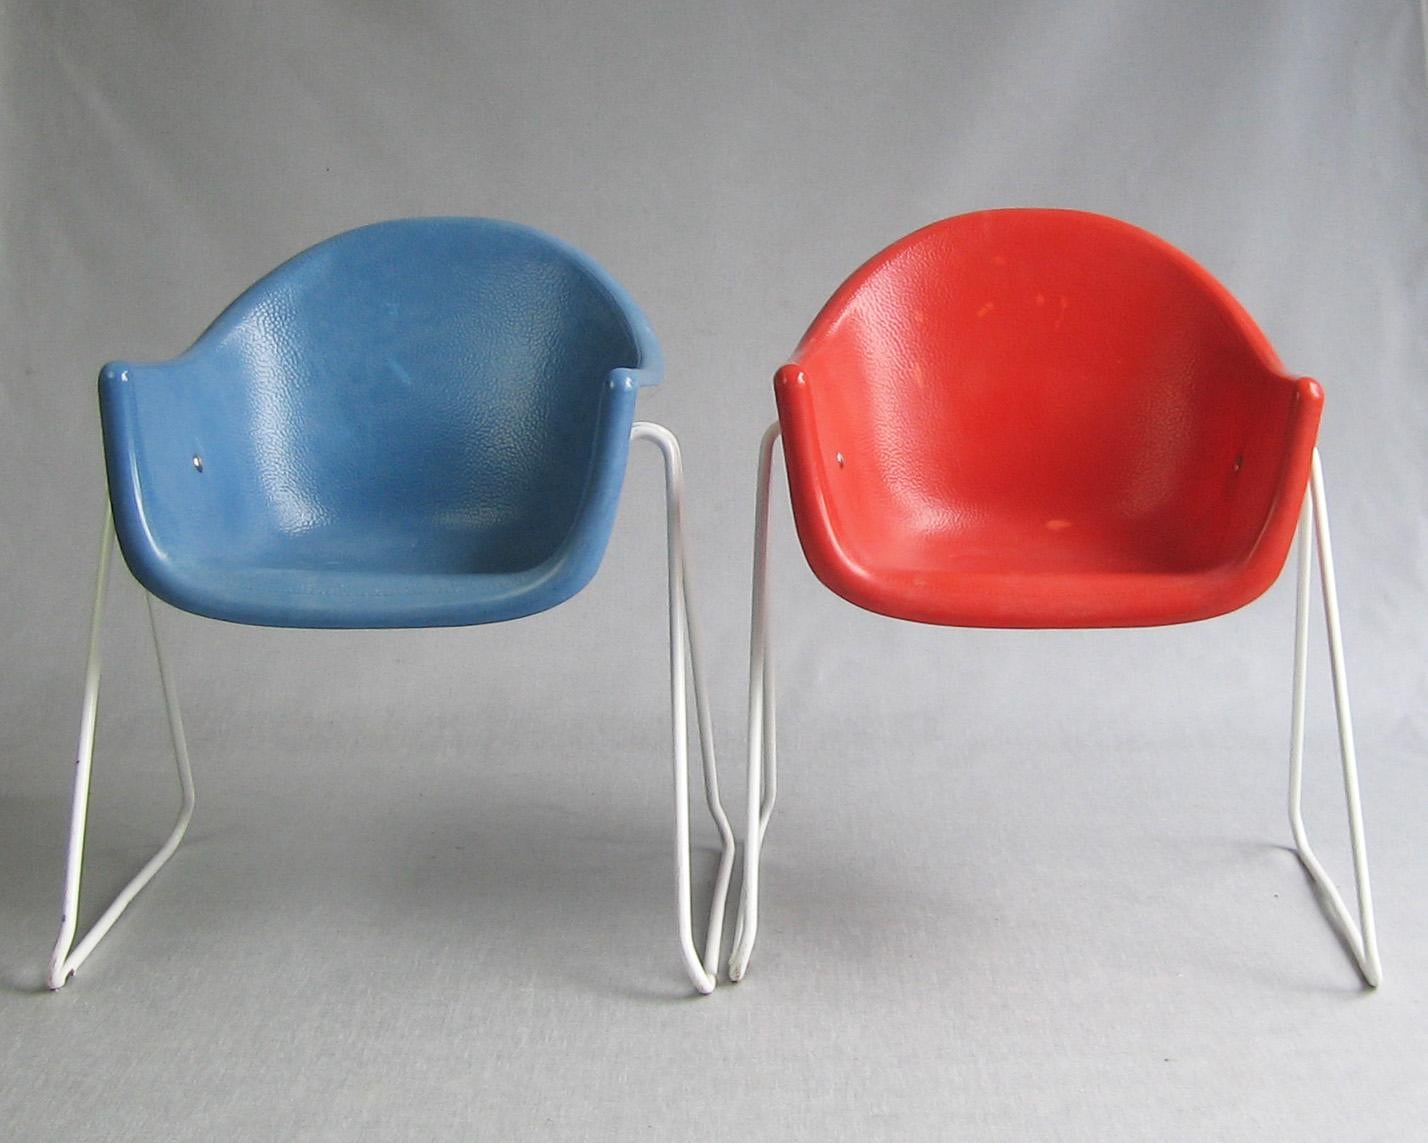 Set of 2 chairs Walter Papst kids chairs - Original manufacturer sticker underneath one chair.
Design Walter Papst, Dieter Thern, Prof. Levsen - Year 1961 - 1968 
Manufacturer Wilkhahn, Germany 

Kids shell chairs, designed by Walter Papst in 1960.